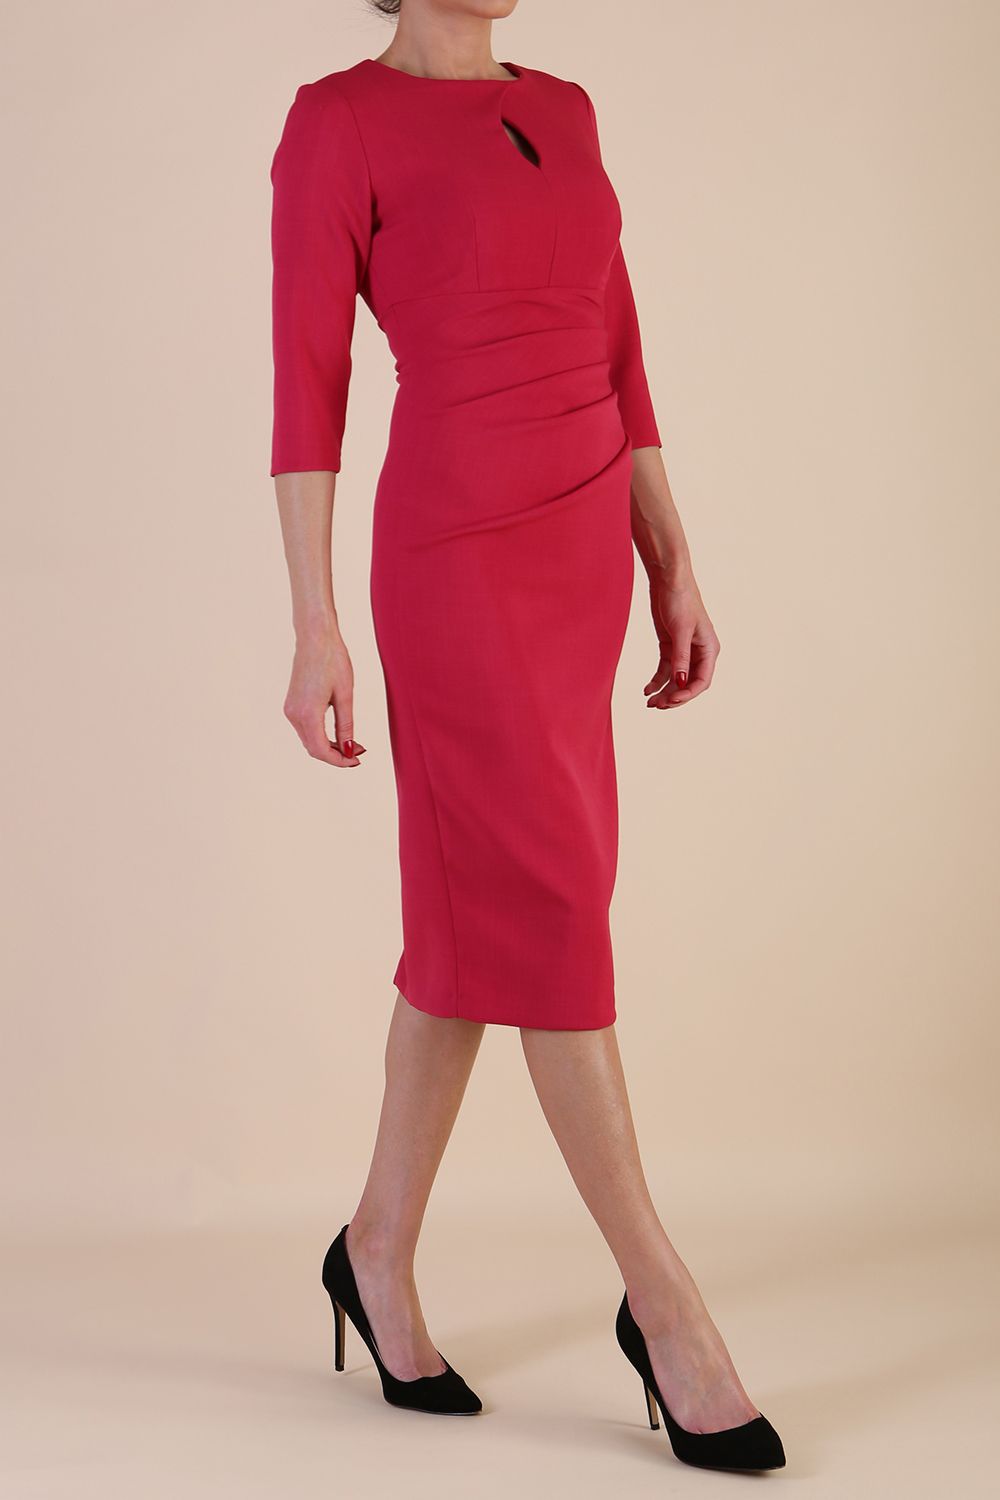 model wearing diva catwalk ubrique pencil dress with a keyhole detail and sleeves in Raspberry Pink